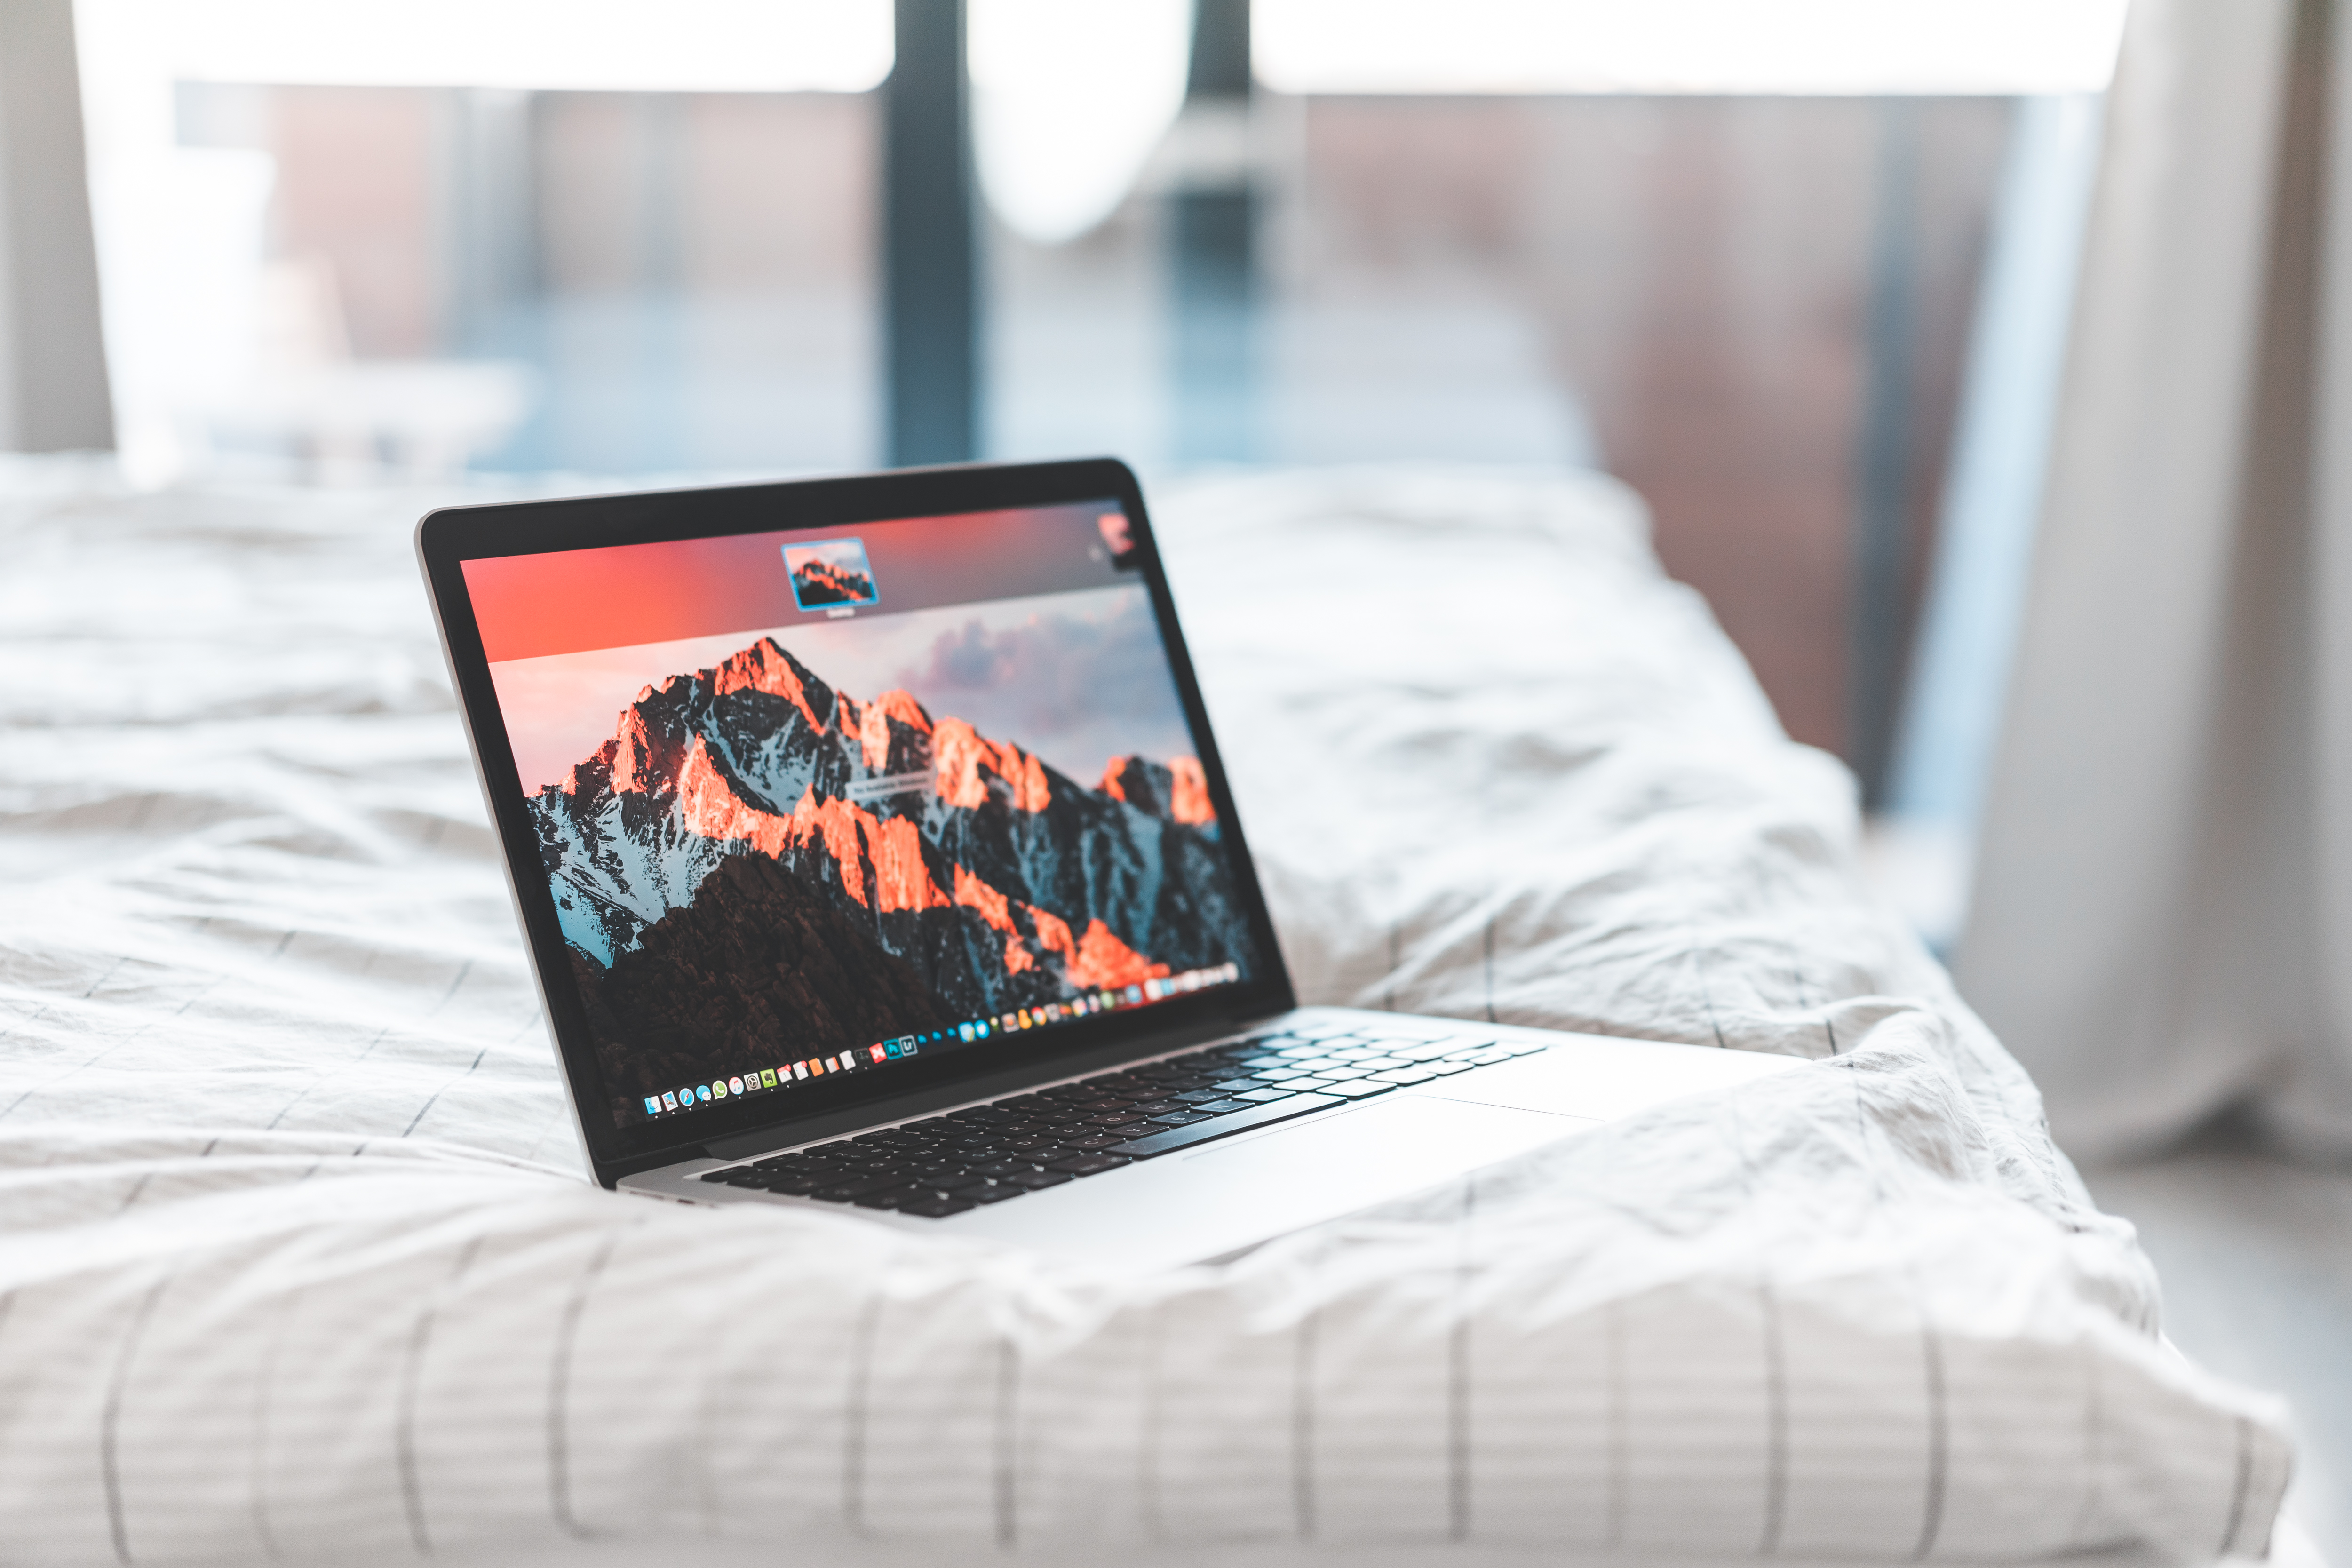 systeem snap Per Laptop in Bed Free Stock Photo | picjumbo